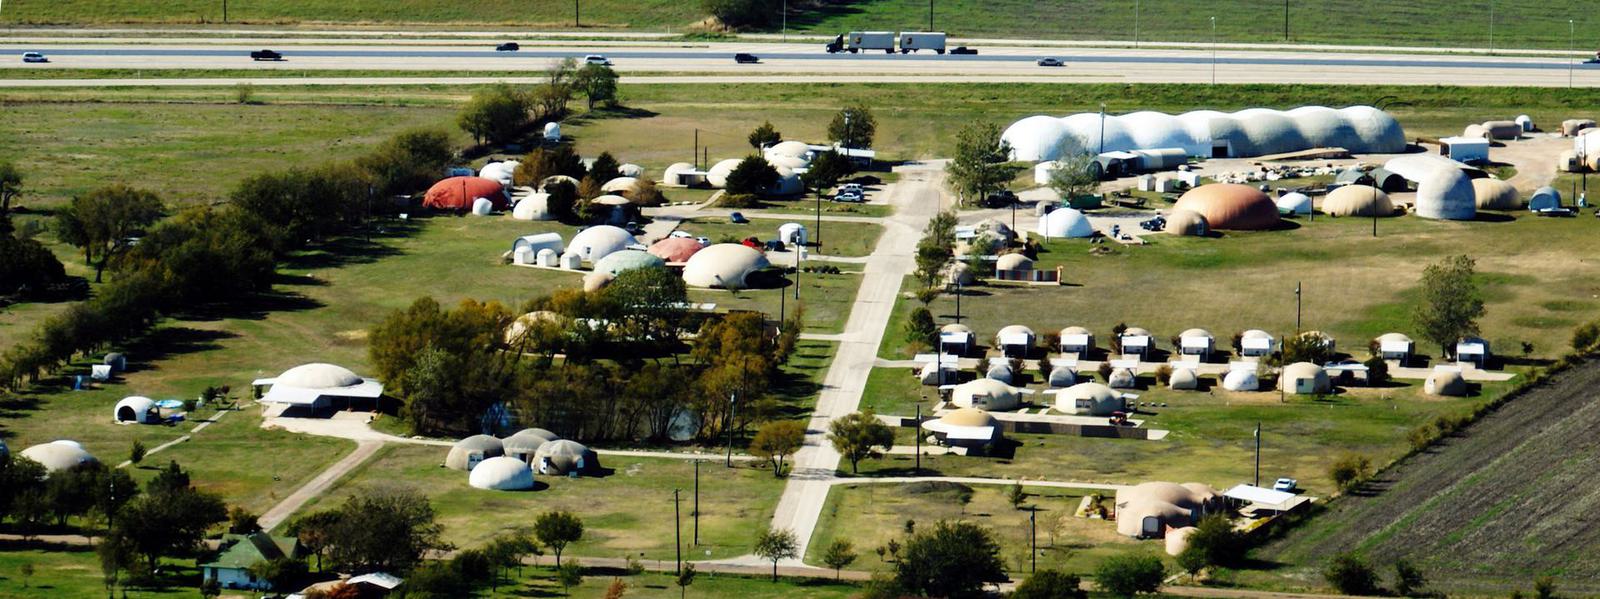 The Monolithic Dome Research Park in Italy, Texas